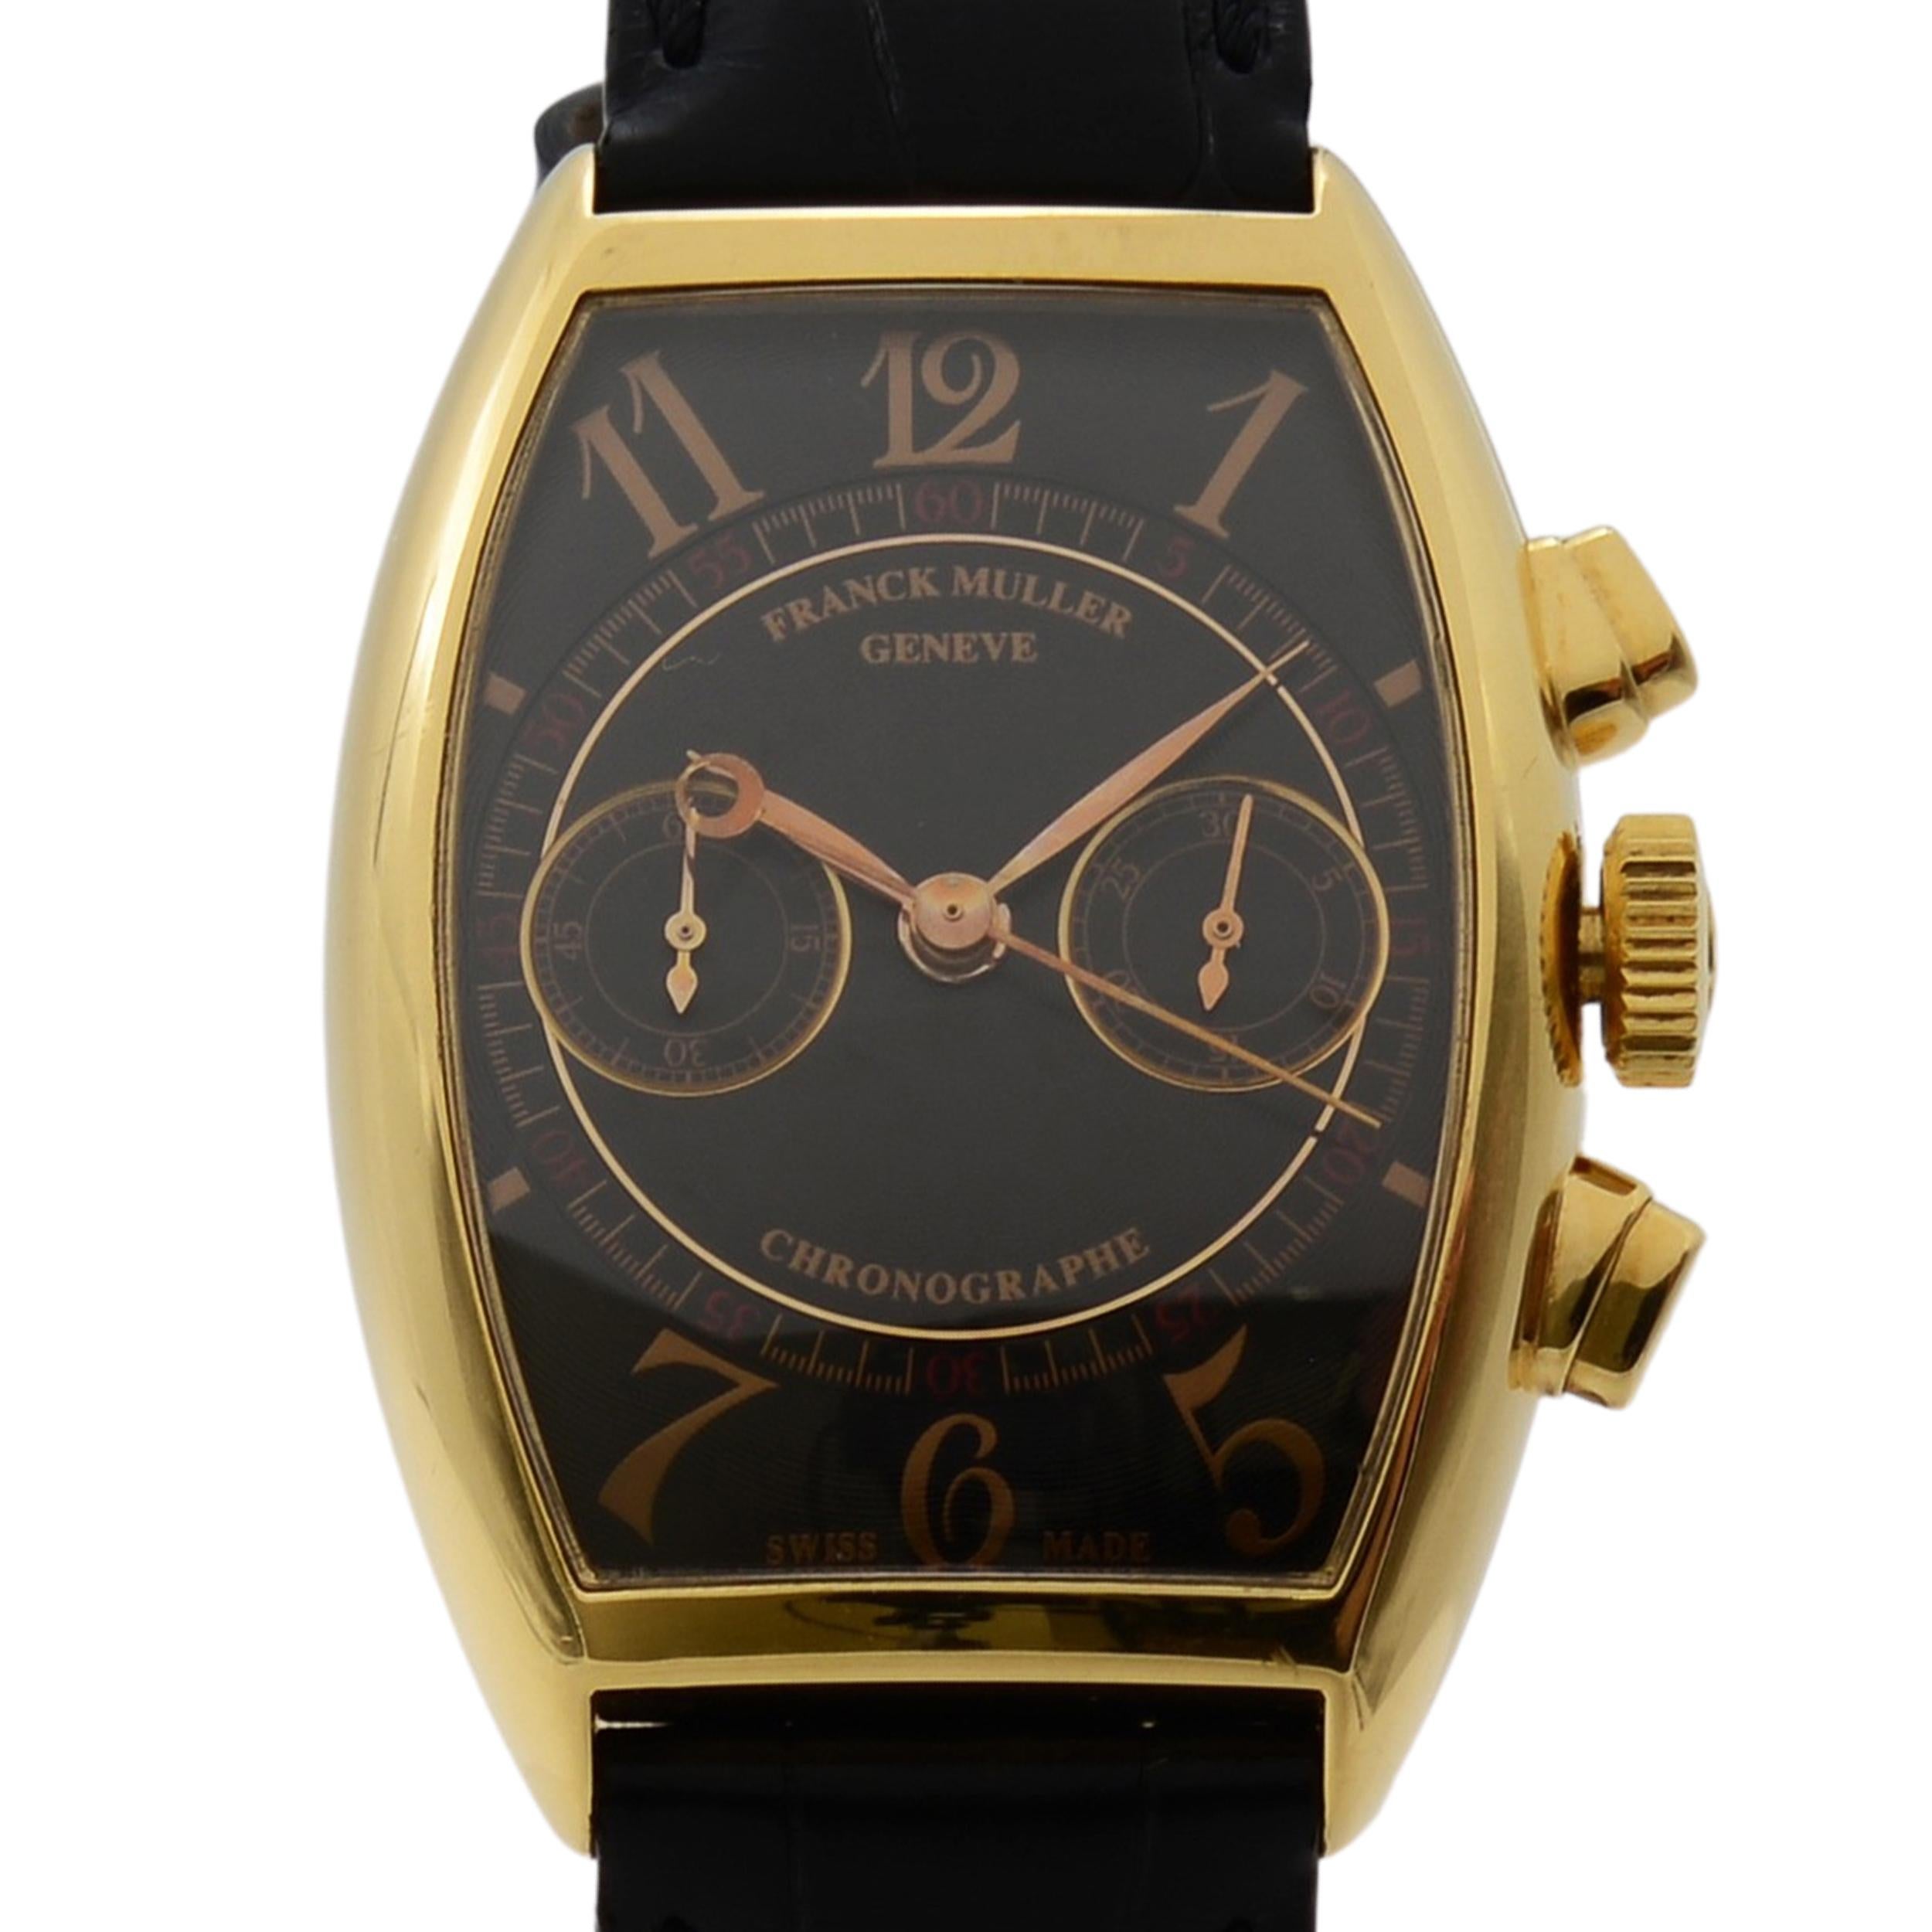 This pre-owned Franck Muller Casablanca 5850 CC is a beautiful  timepiece that is powered by mechanical (hand-winding) movement which is cased in a 18K yellow gold case. It has a tonneau shape face, chronograph, small seconds subdial dial and has